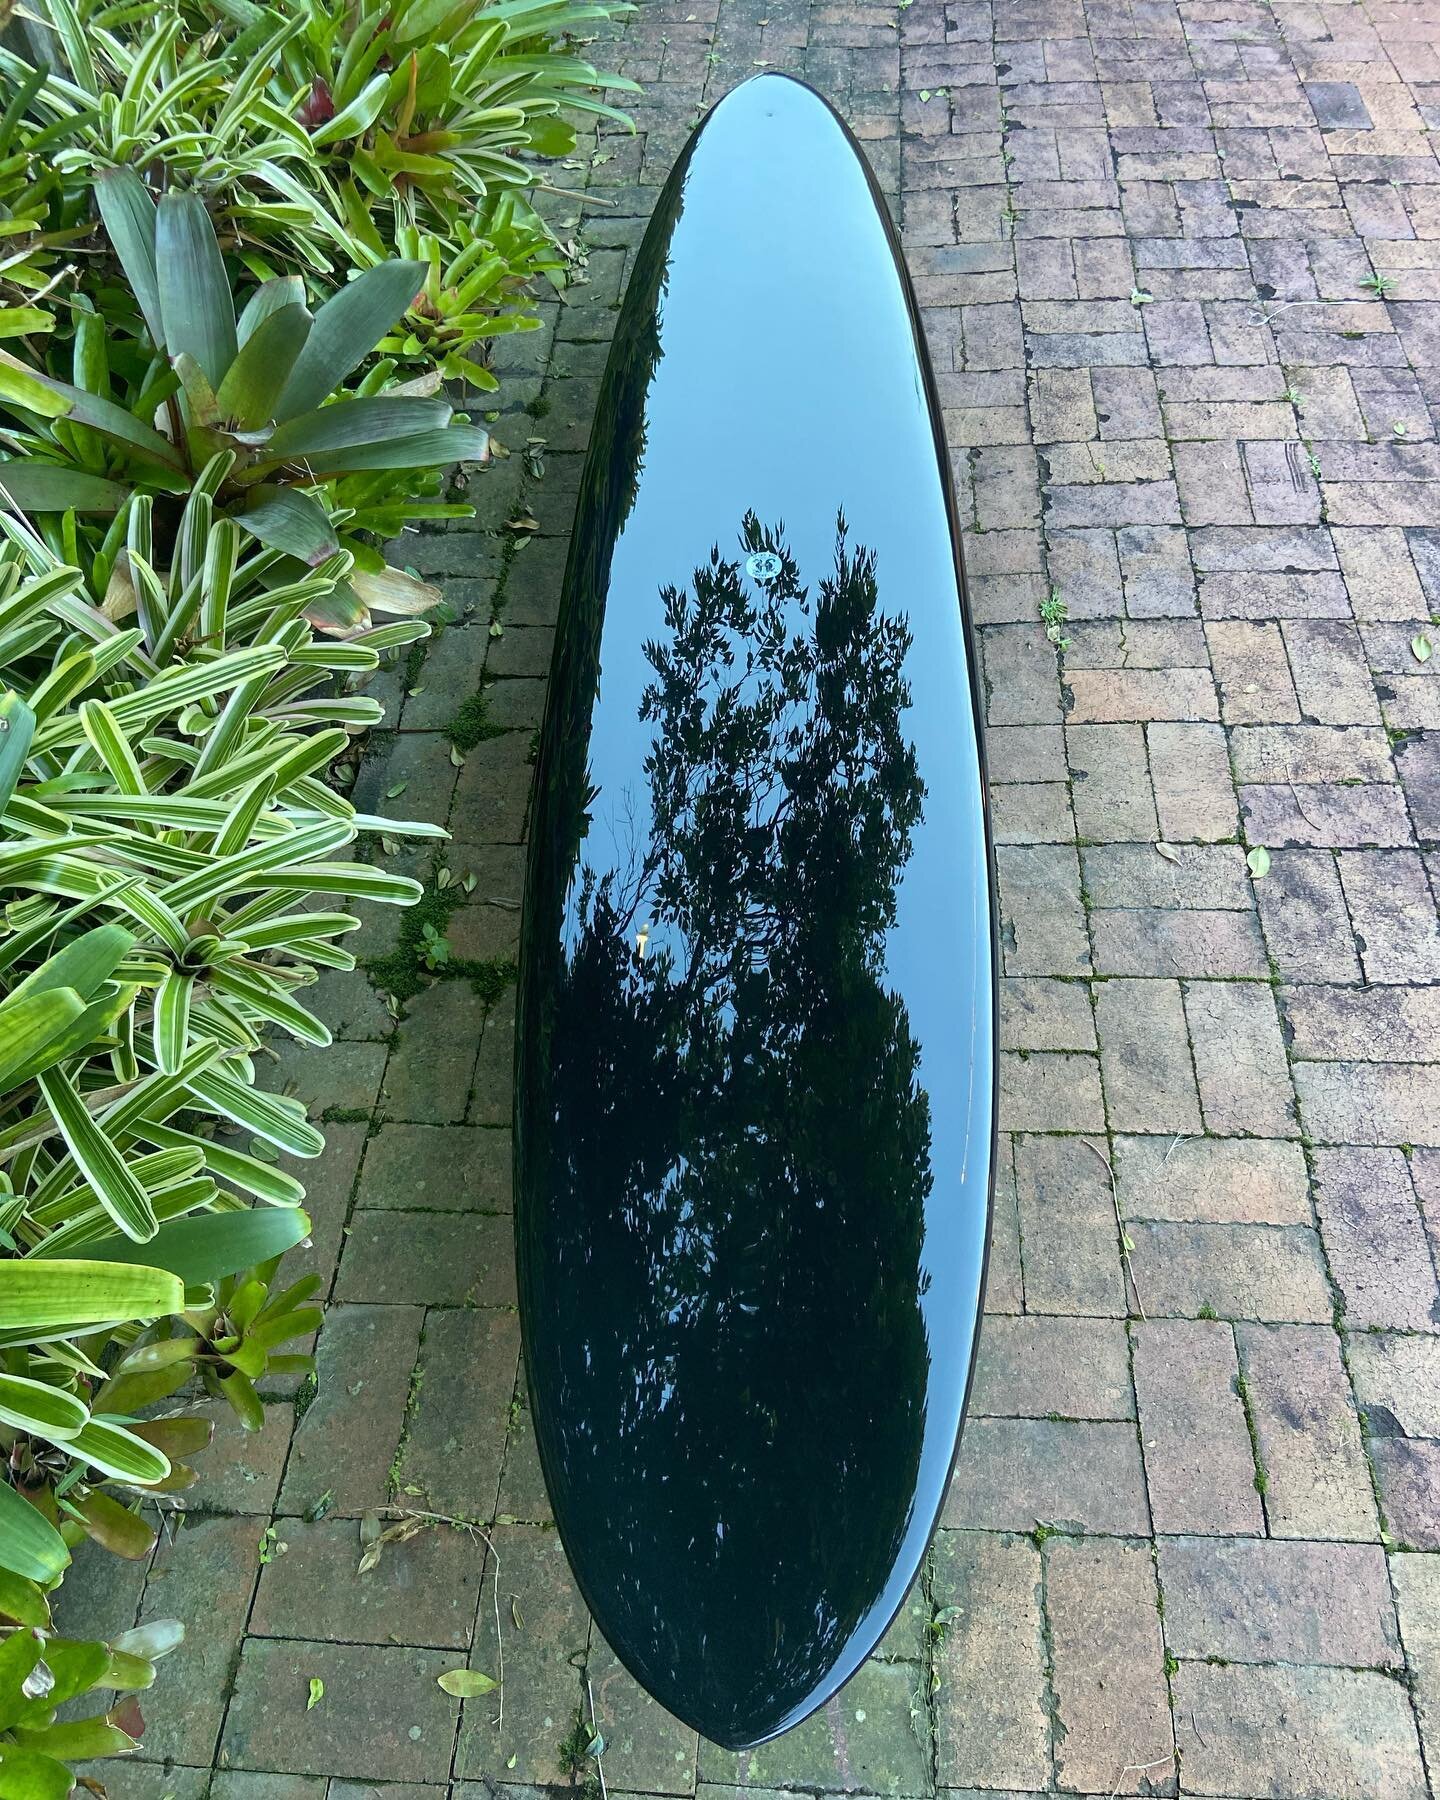 9&rsquo;2&rdquo;&bull; 22 &frac12; &bull; 2 13/16 &bull; &ldquo; Le Mans&rdquo; speed shape design.  Glassed with opaque black deck, cloth stained resin color bottom, fcs single fin box, this unique board is available for purchase @sunburntmess.surf 